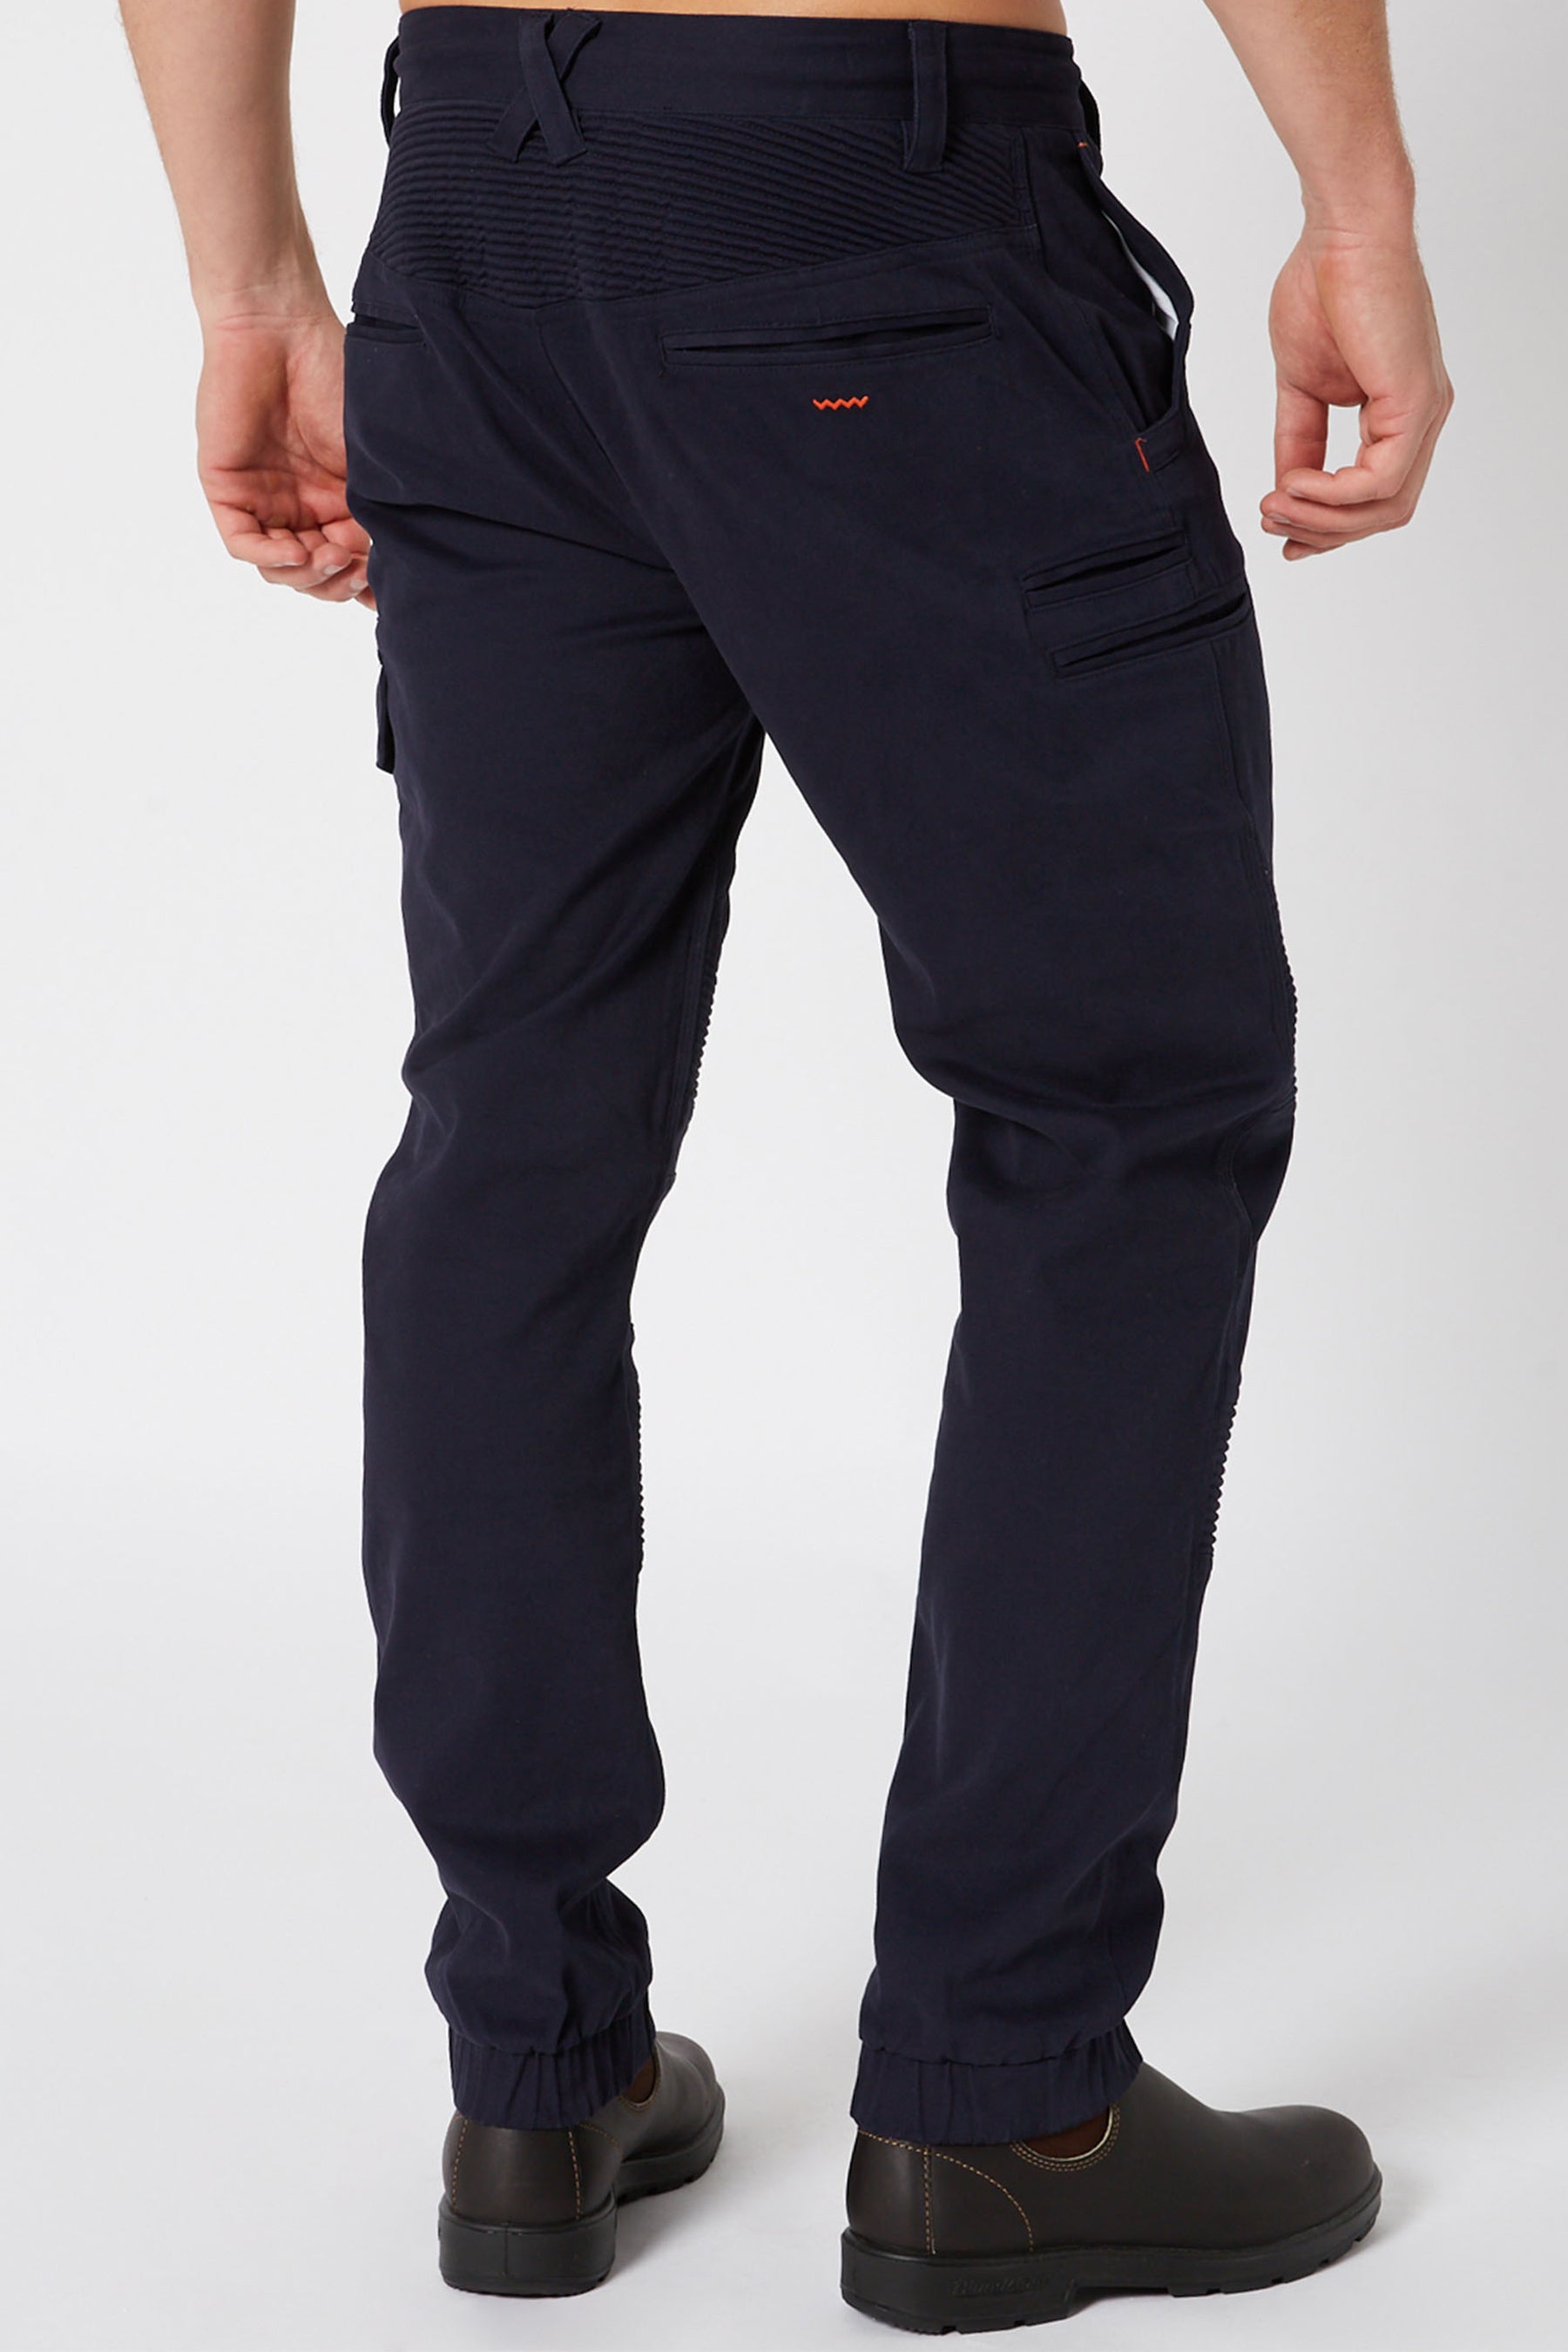 JP Fueled Corrugated Stretch Pant - Ink